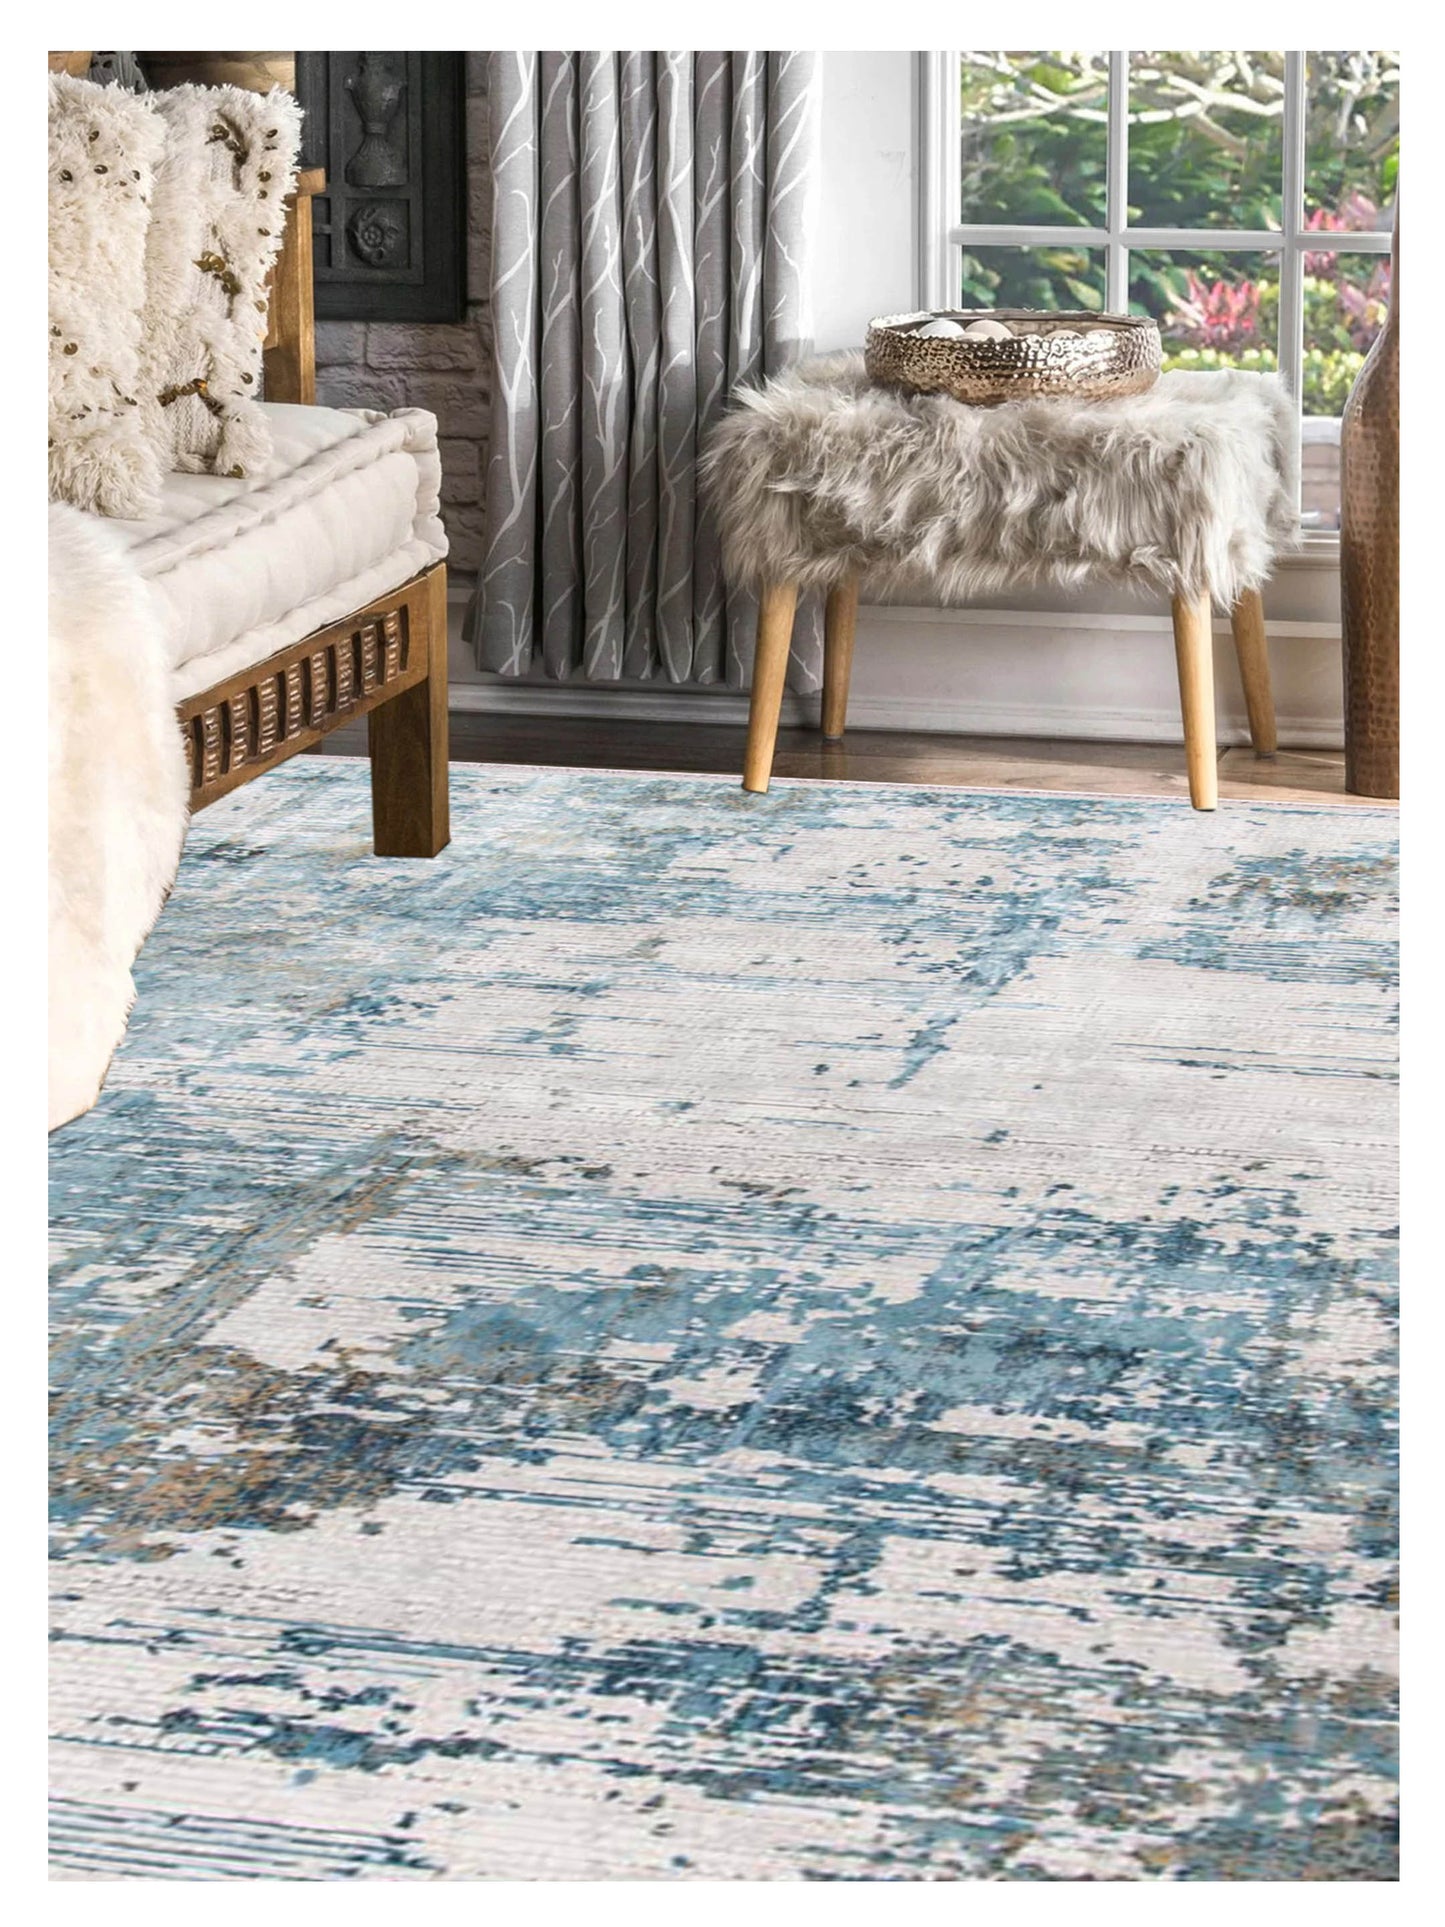 Limited Drew DD-653 IVORY BLUE Transitional Machinemade Rug